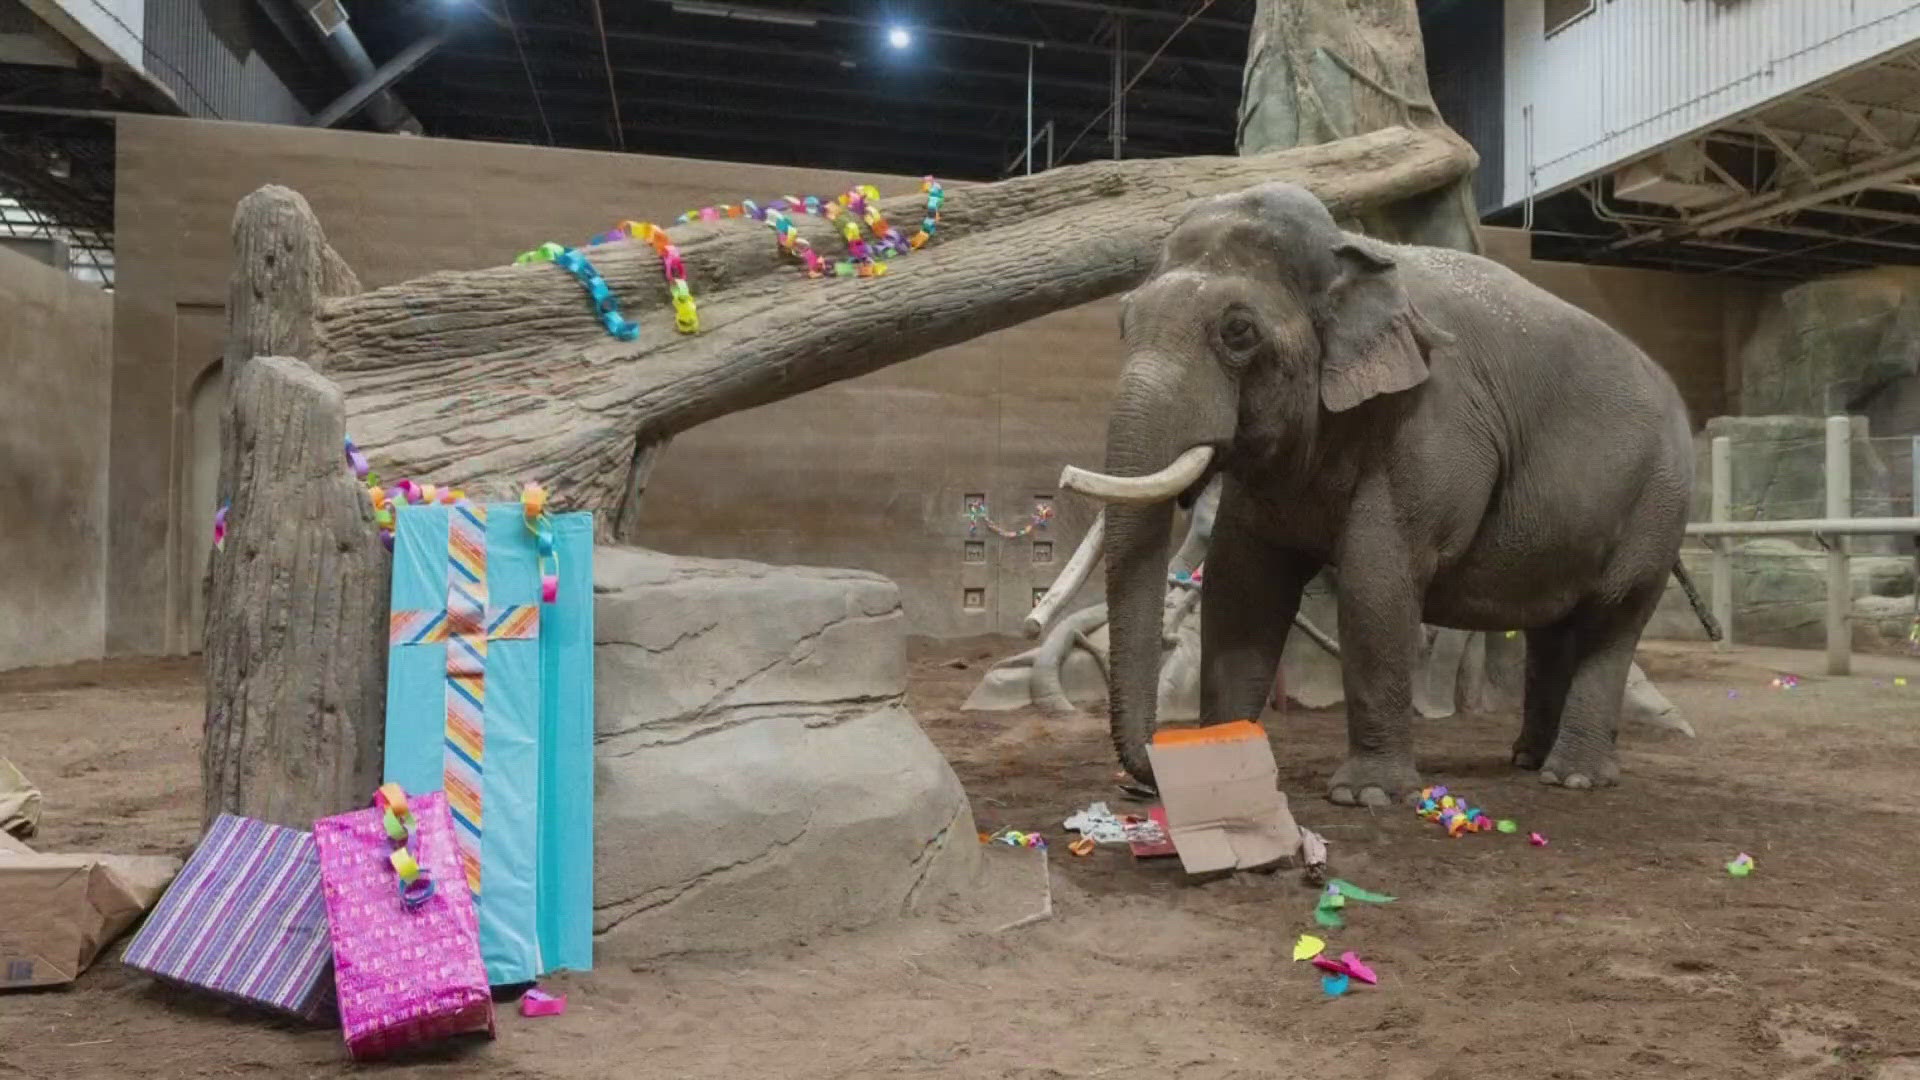 ​In honor of Connie's upcoming 50th birthday and the elephant's departure, the zoo held a special celebration on Saturday.